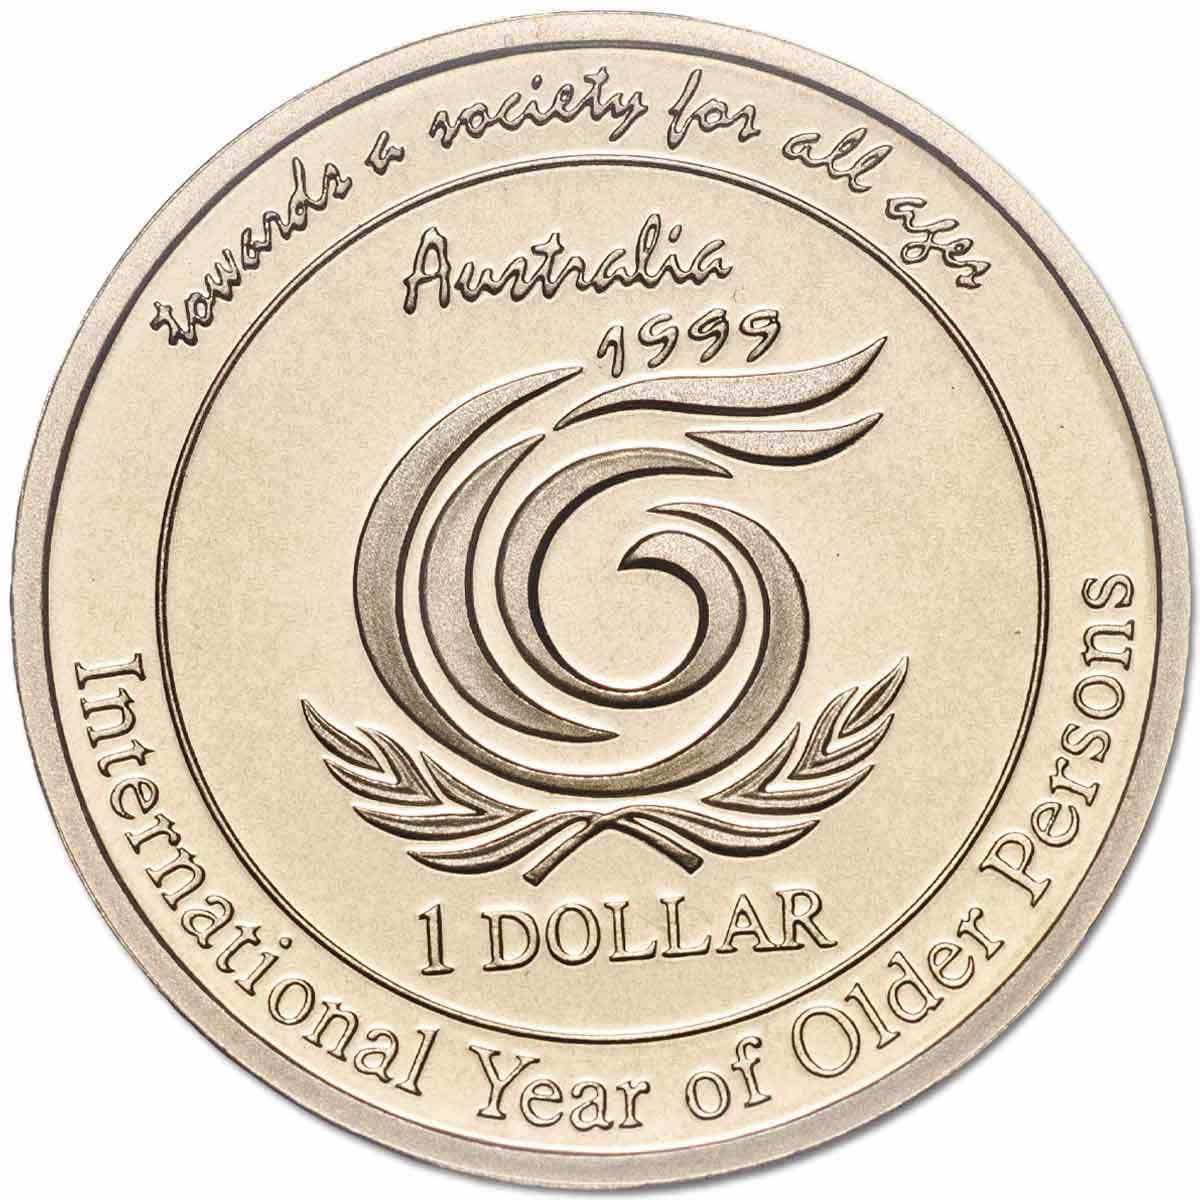 Australia International Year of Older Persons 1999 6-Coin Proof Set